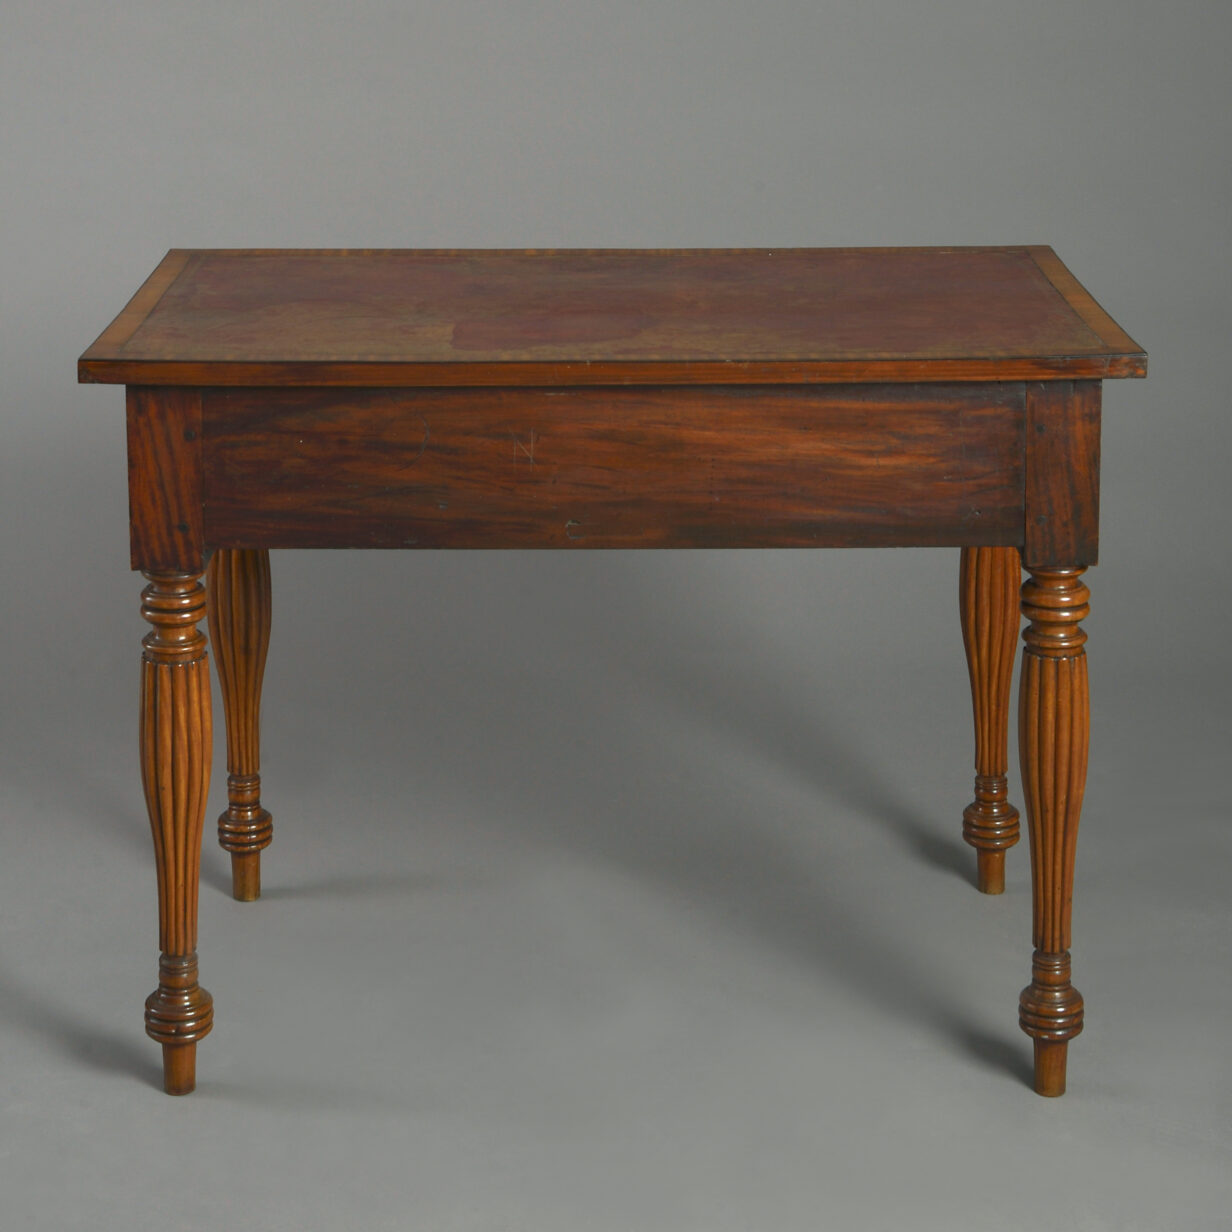 Early 19th century william iv period satinwood campaign desk